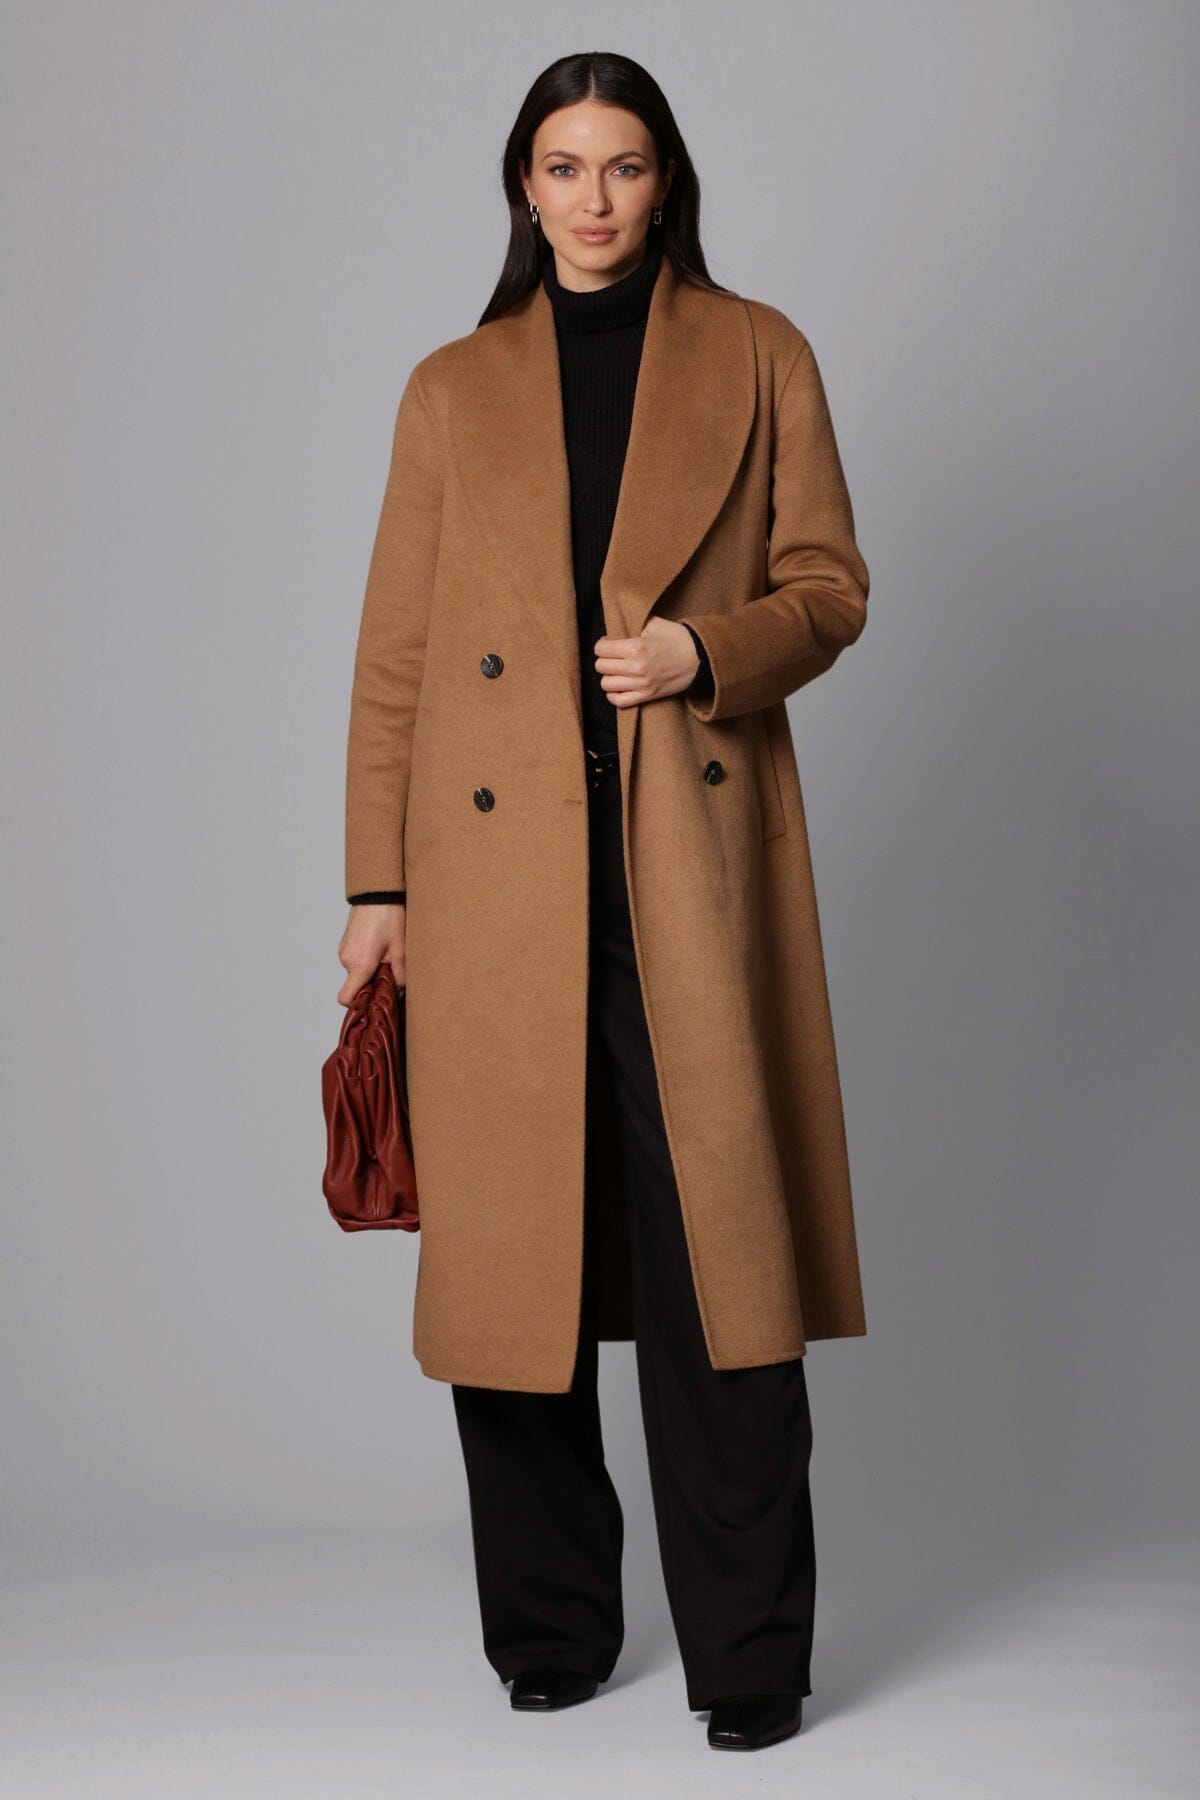 camel brown double face wrap mid length coat - women's figure flattering office to date night coats 